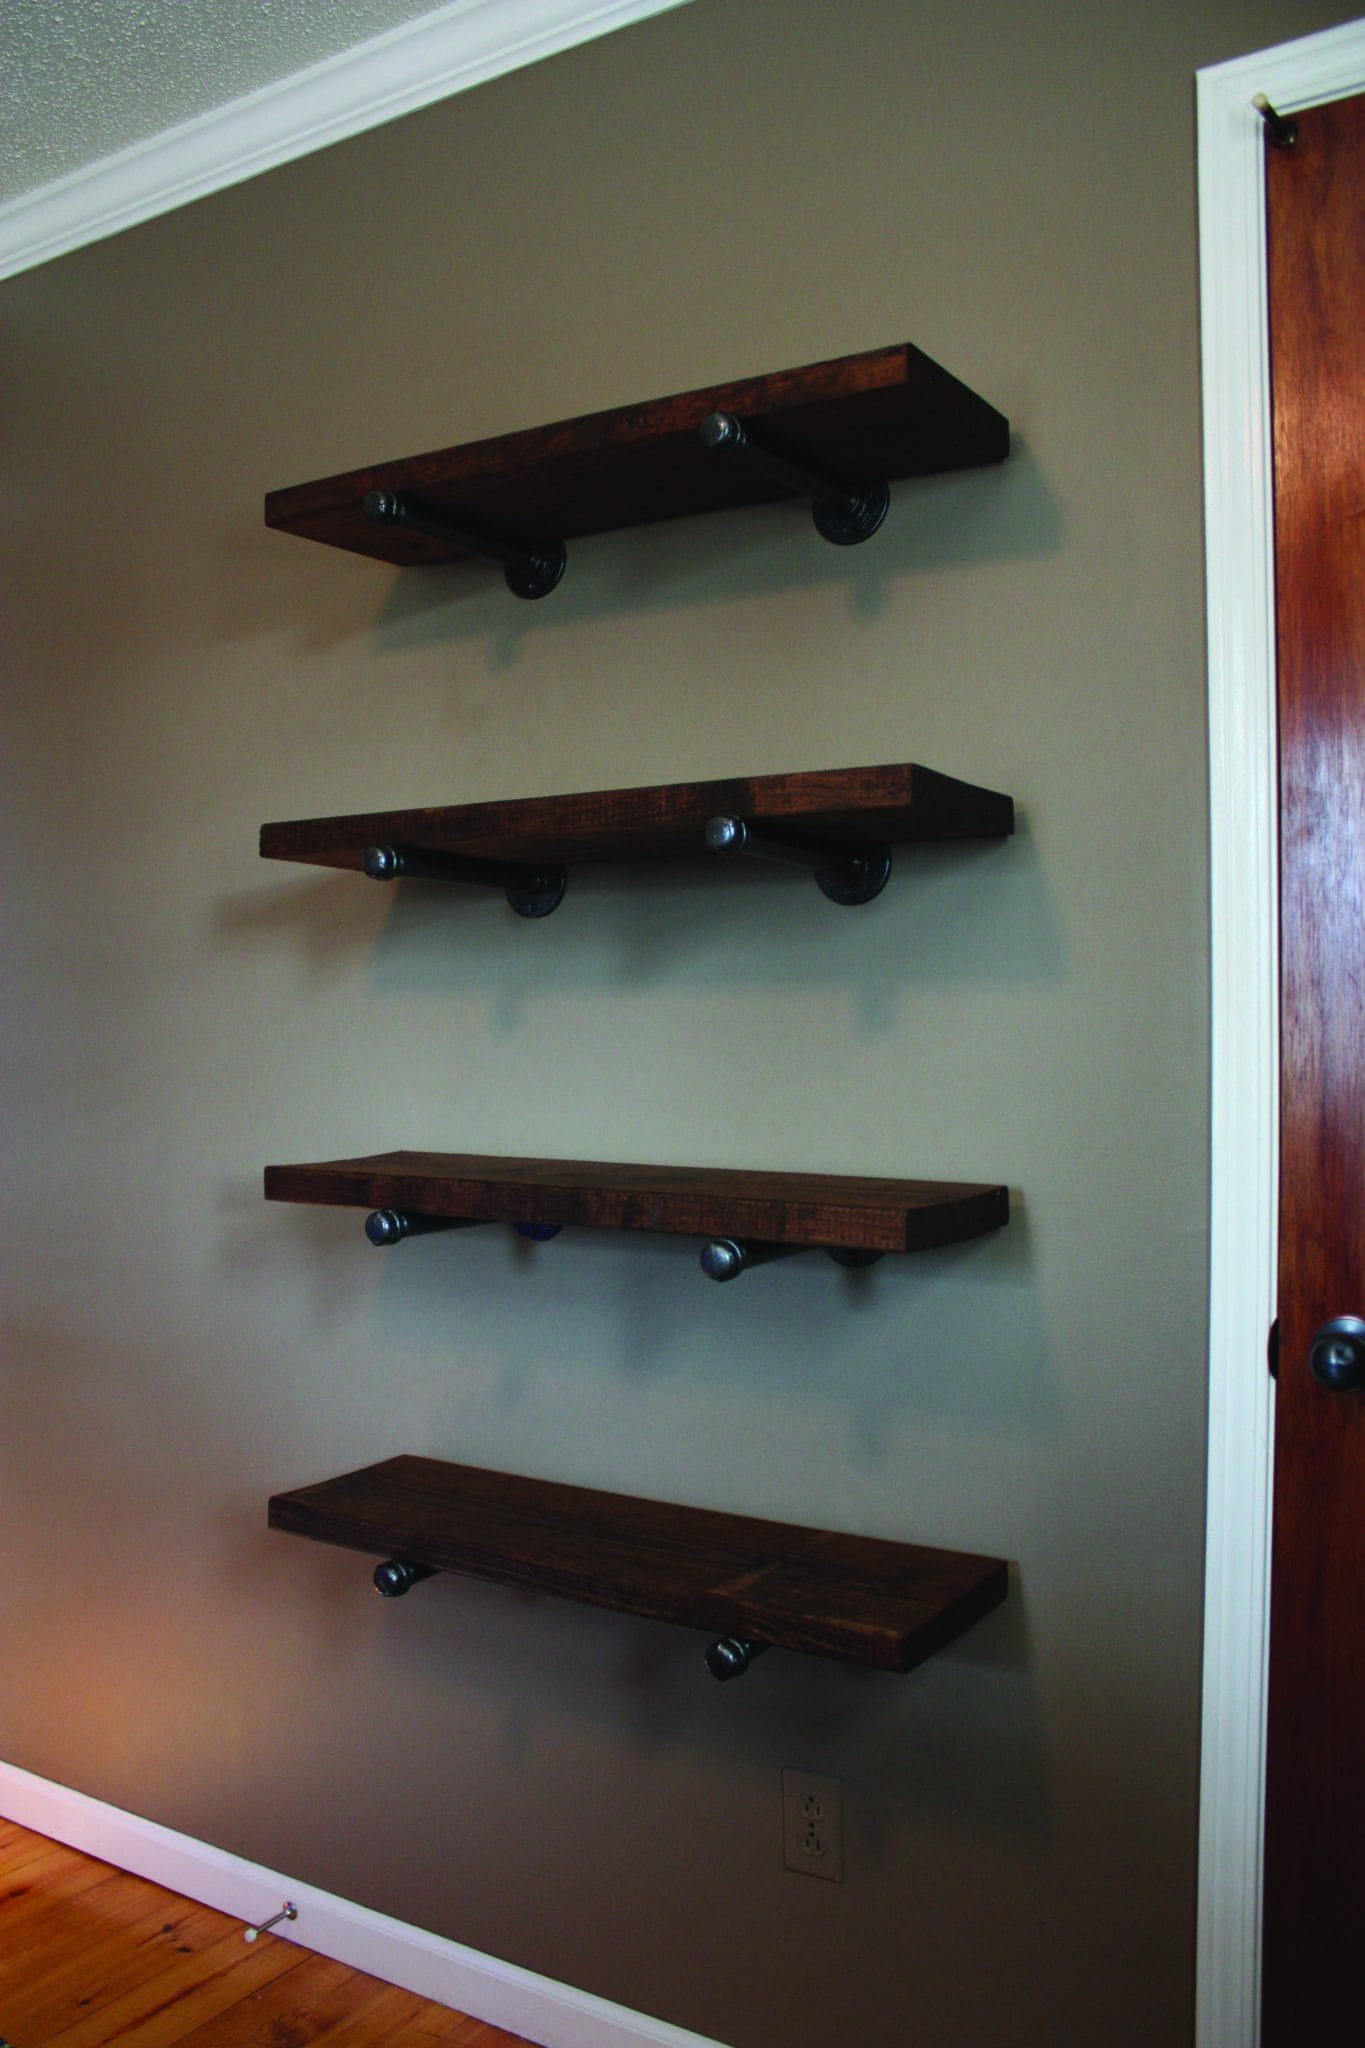 Pipe Bracket Shelving Extreme How To, Using Plumbing Pipe For Shelving